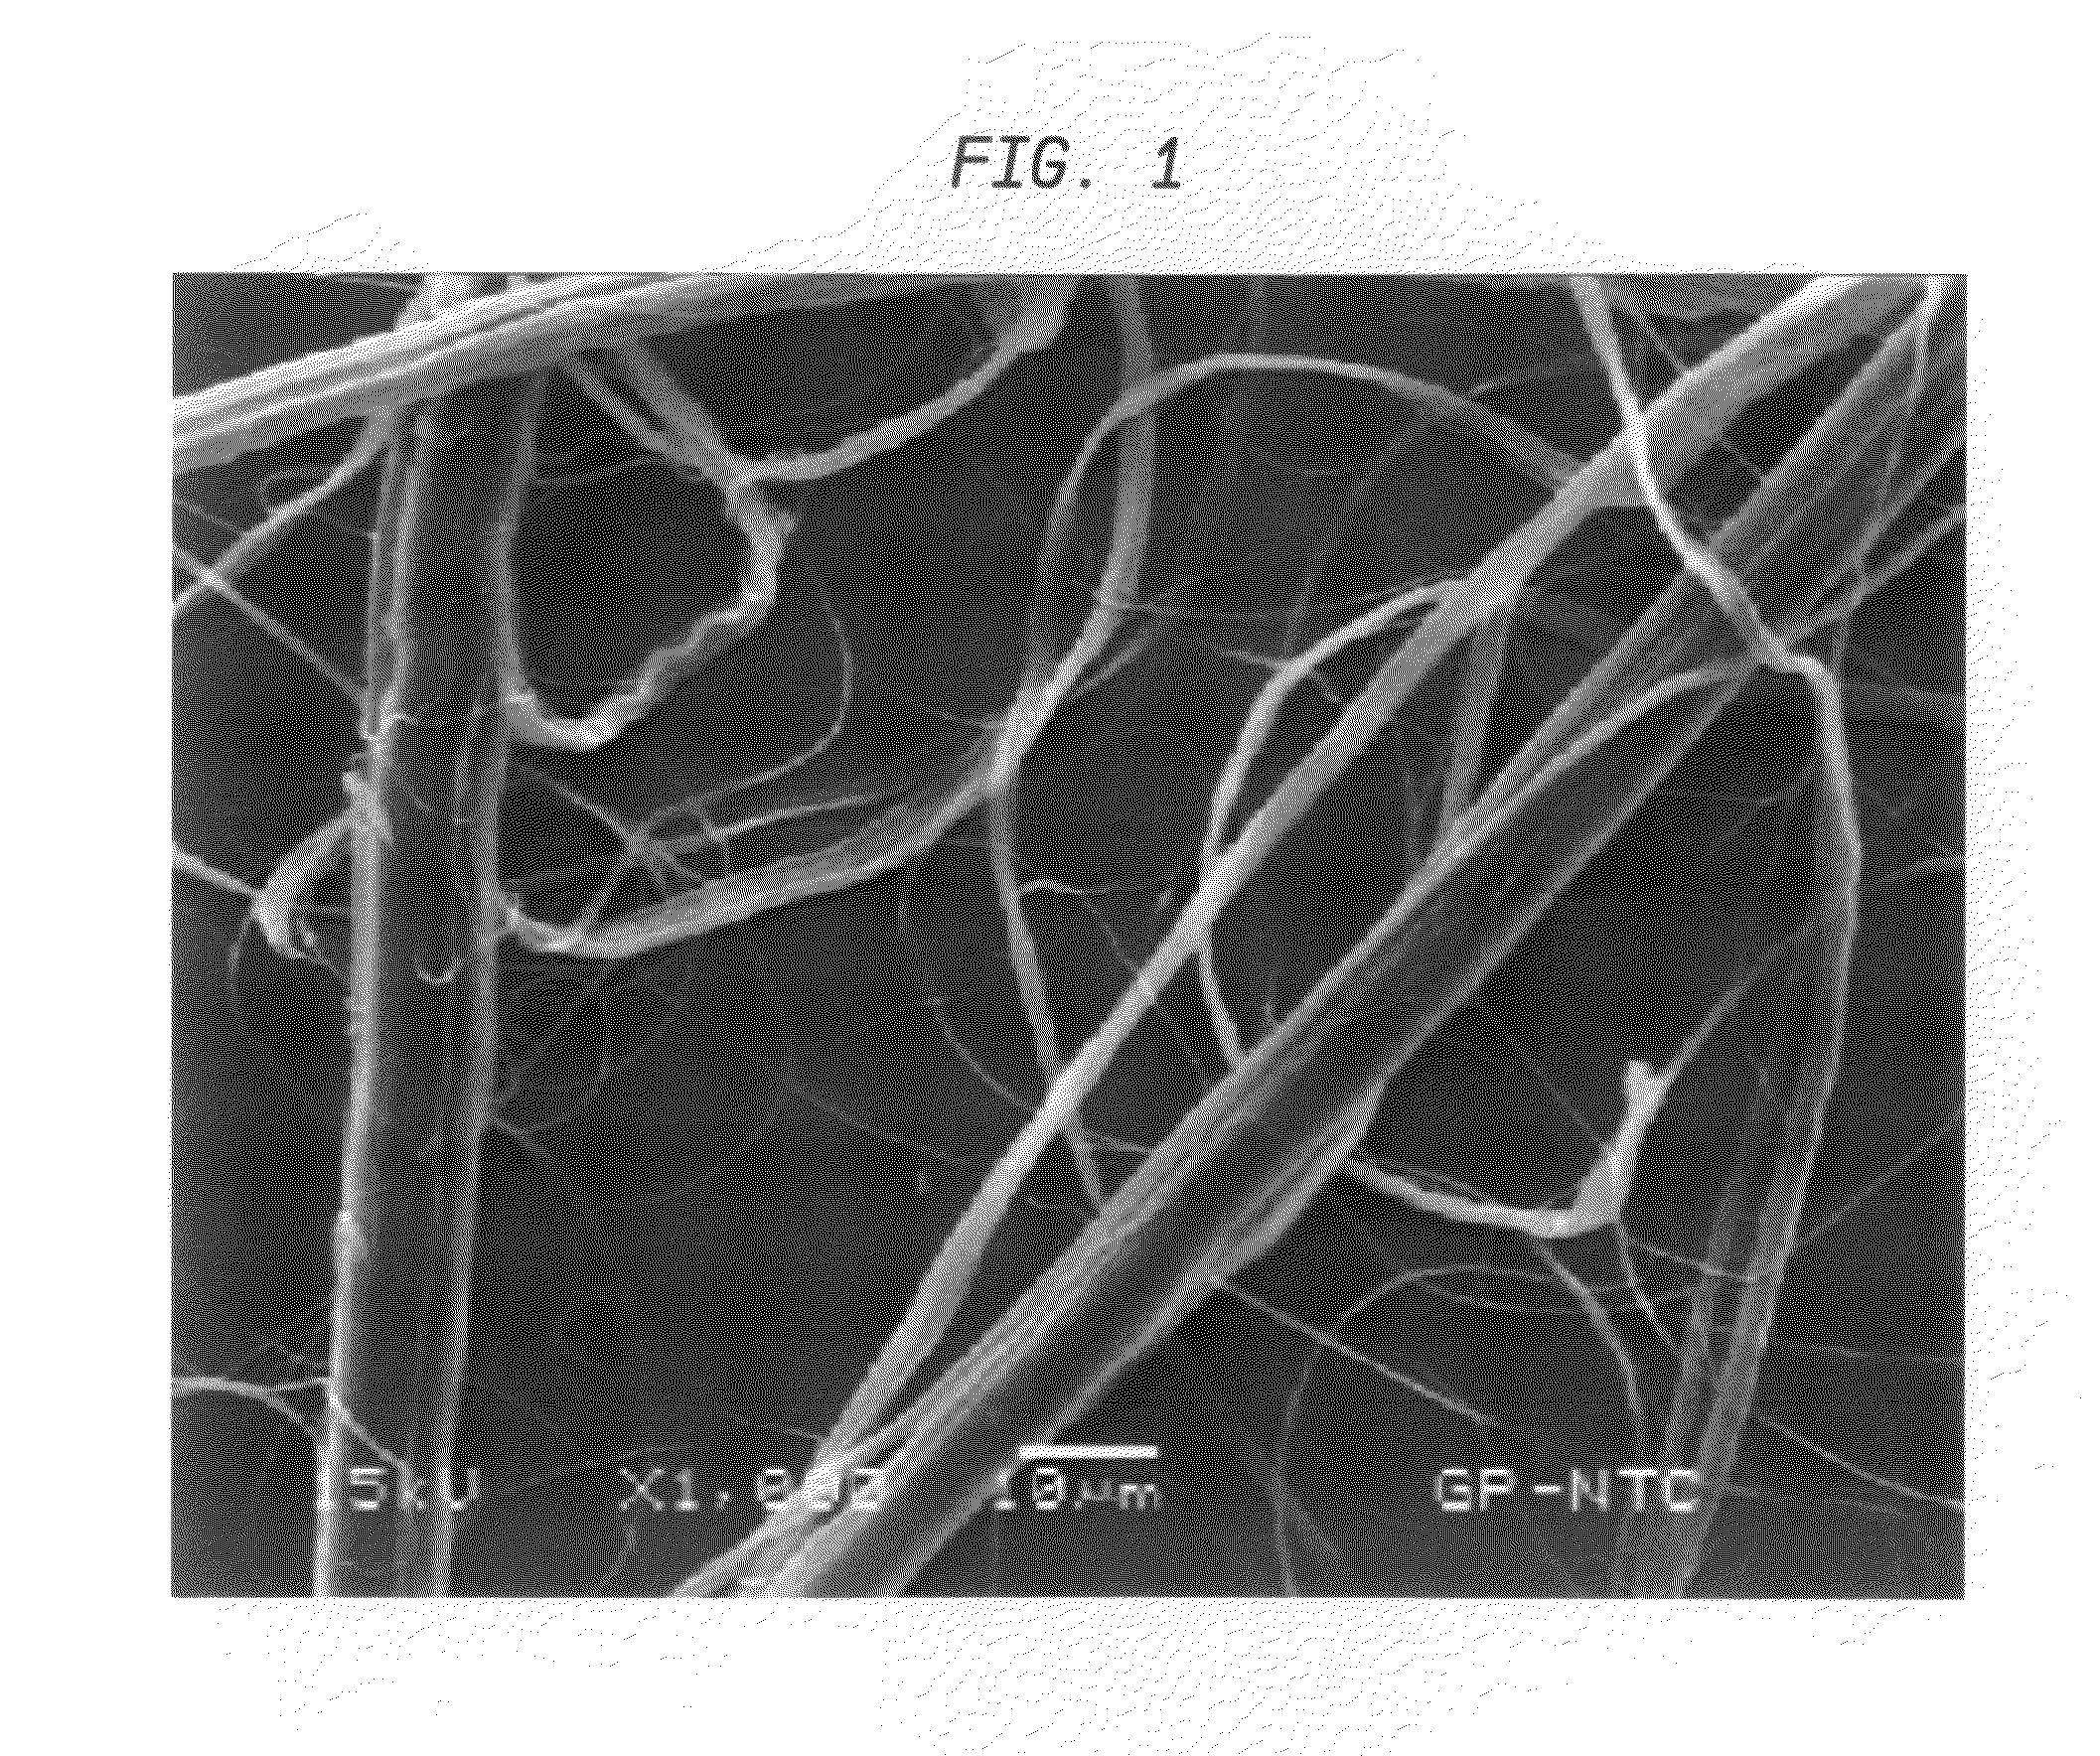 Method of making regenerated cellulose microfibers and absorbent products incorporating same